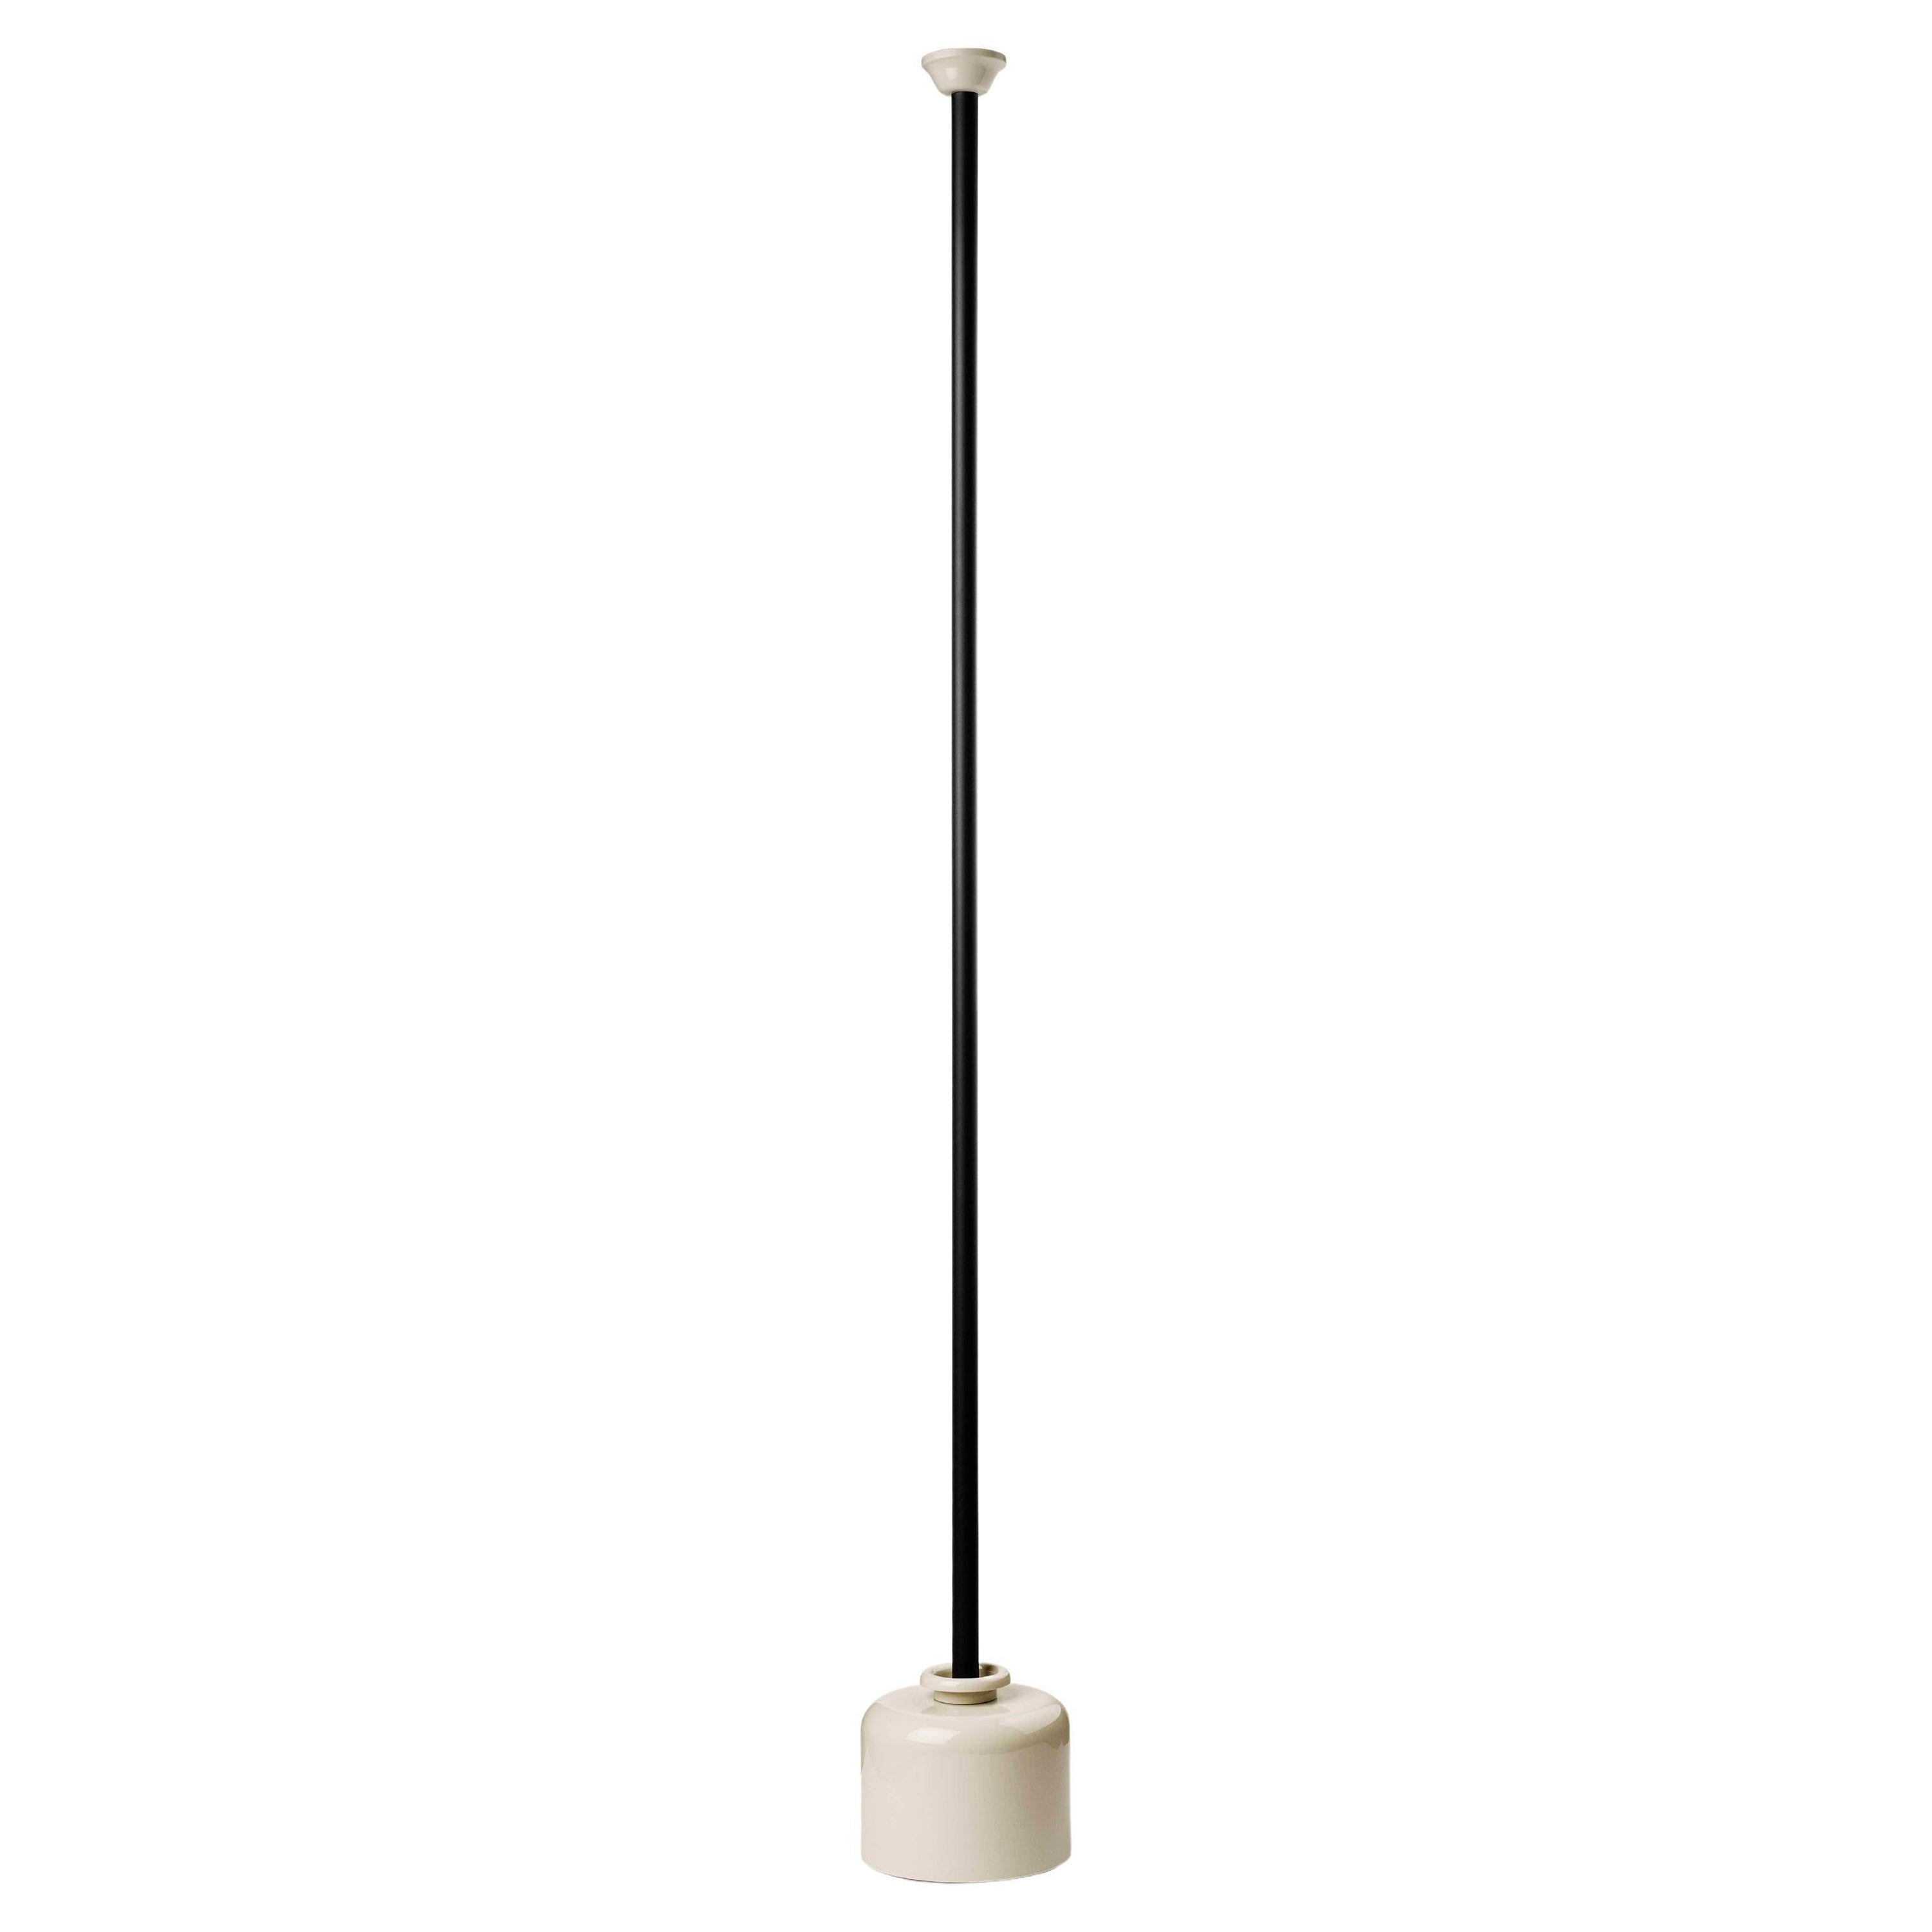 Small Gino Sarfatti Model 1095 Floor Lamp for Astep For Sale